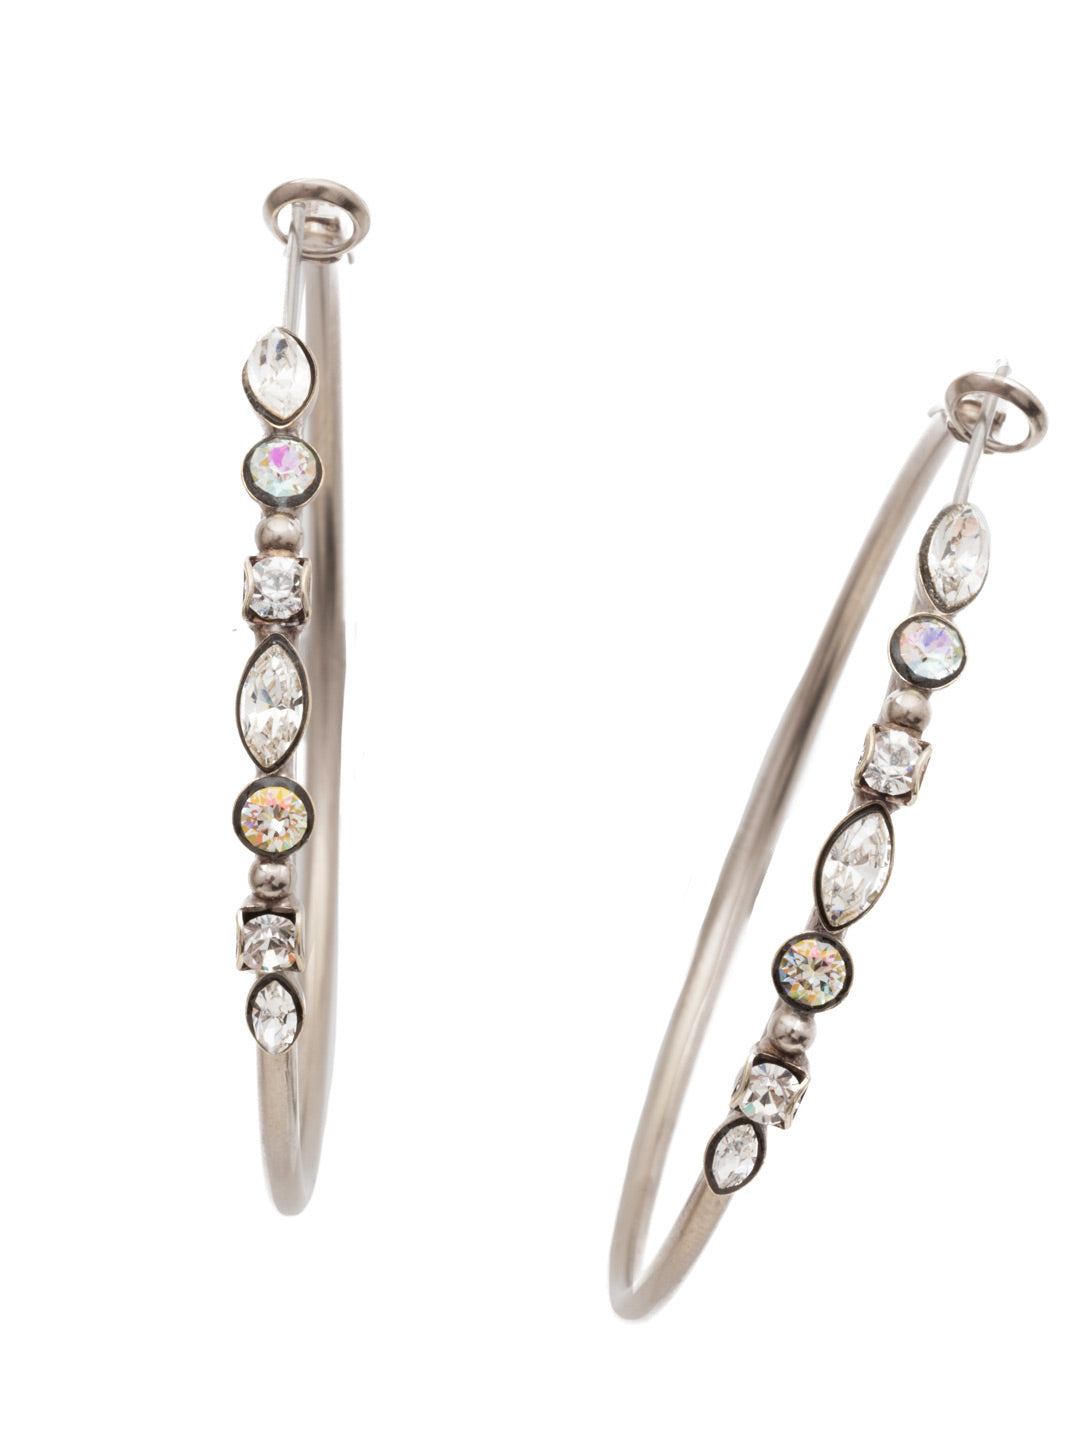 Mixed Media Hoop Earrings - EDK40ASCRE - Hoop earrings with a line of assorted crystals and semi-precious stones that will add the perfect hint of sparkle to your look. From Sorrelli's Crystal Envy collection in our Antique Silver-tone finish.